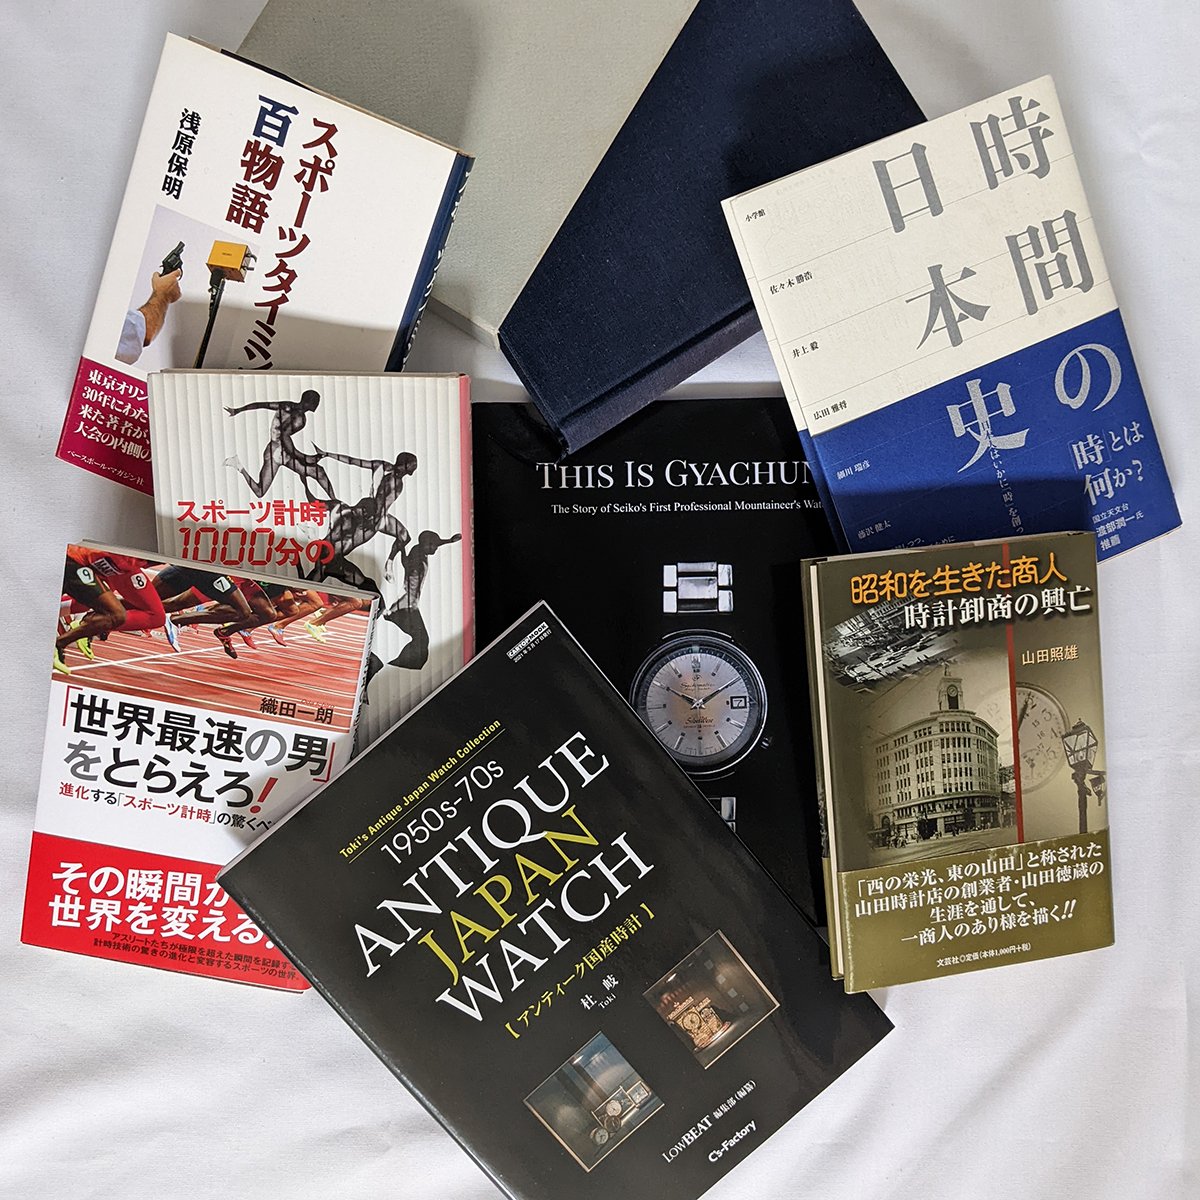 RARE BOOKS IN JAPAN For collectible books